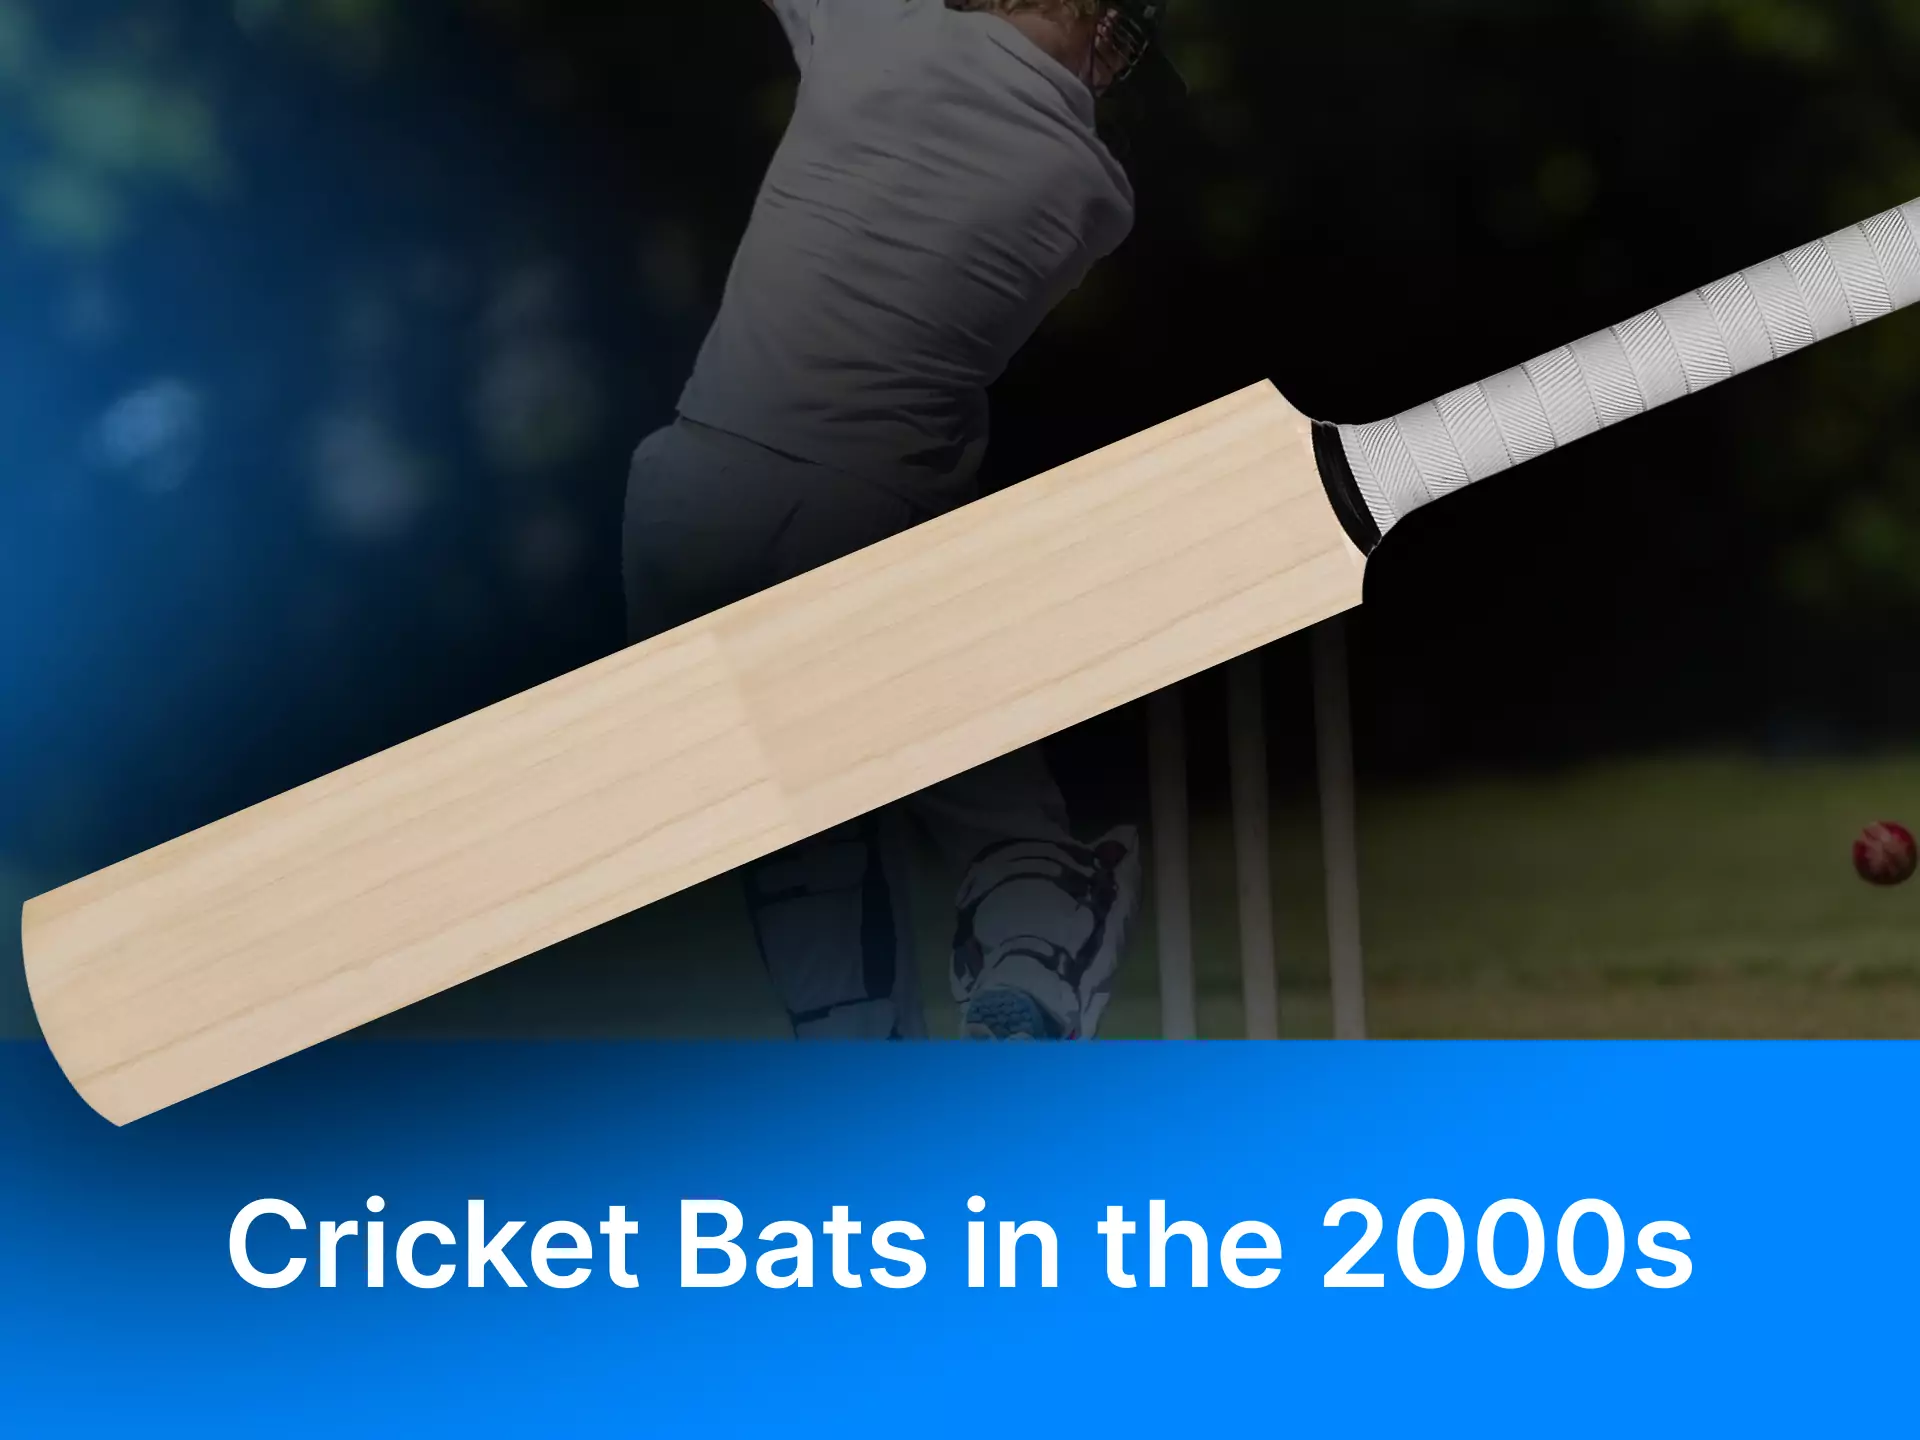 How the cricket bat looked in the 2000s.